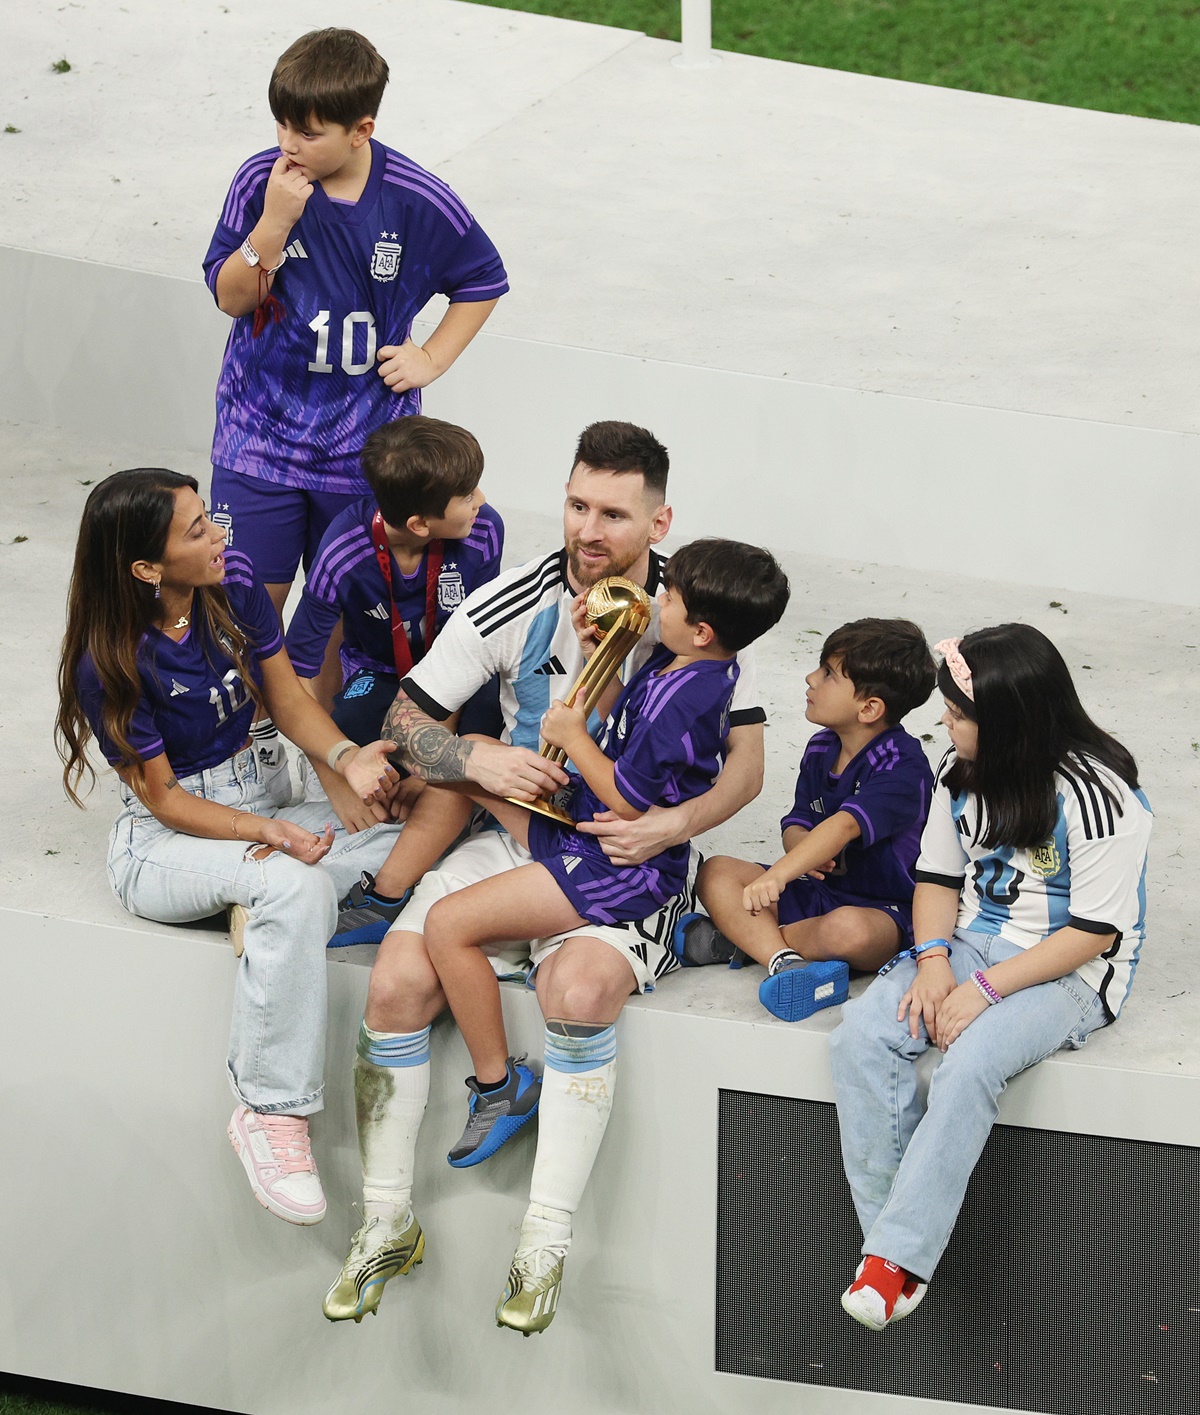 Lionel Messi Celebrates World Cup Win With Wife, Sons: Photos